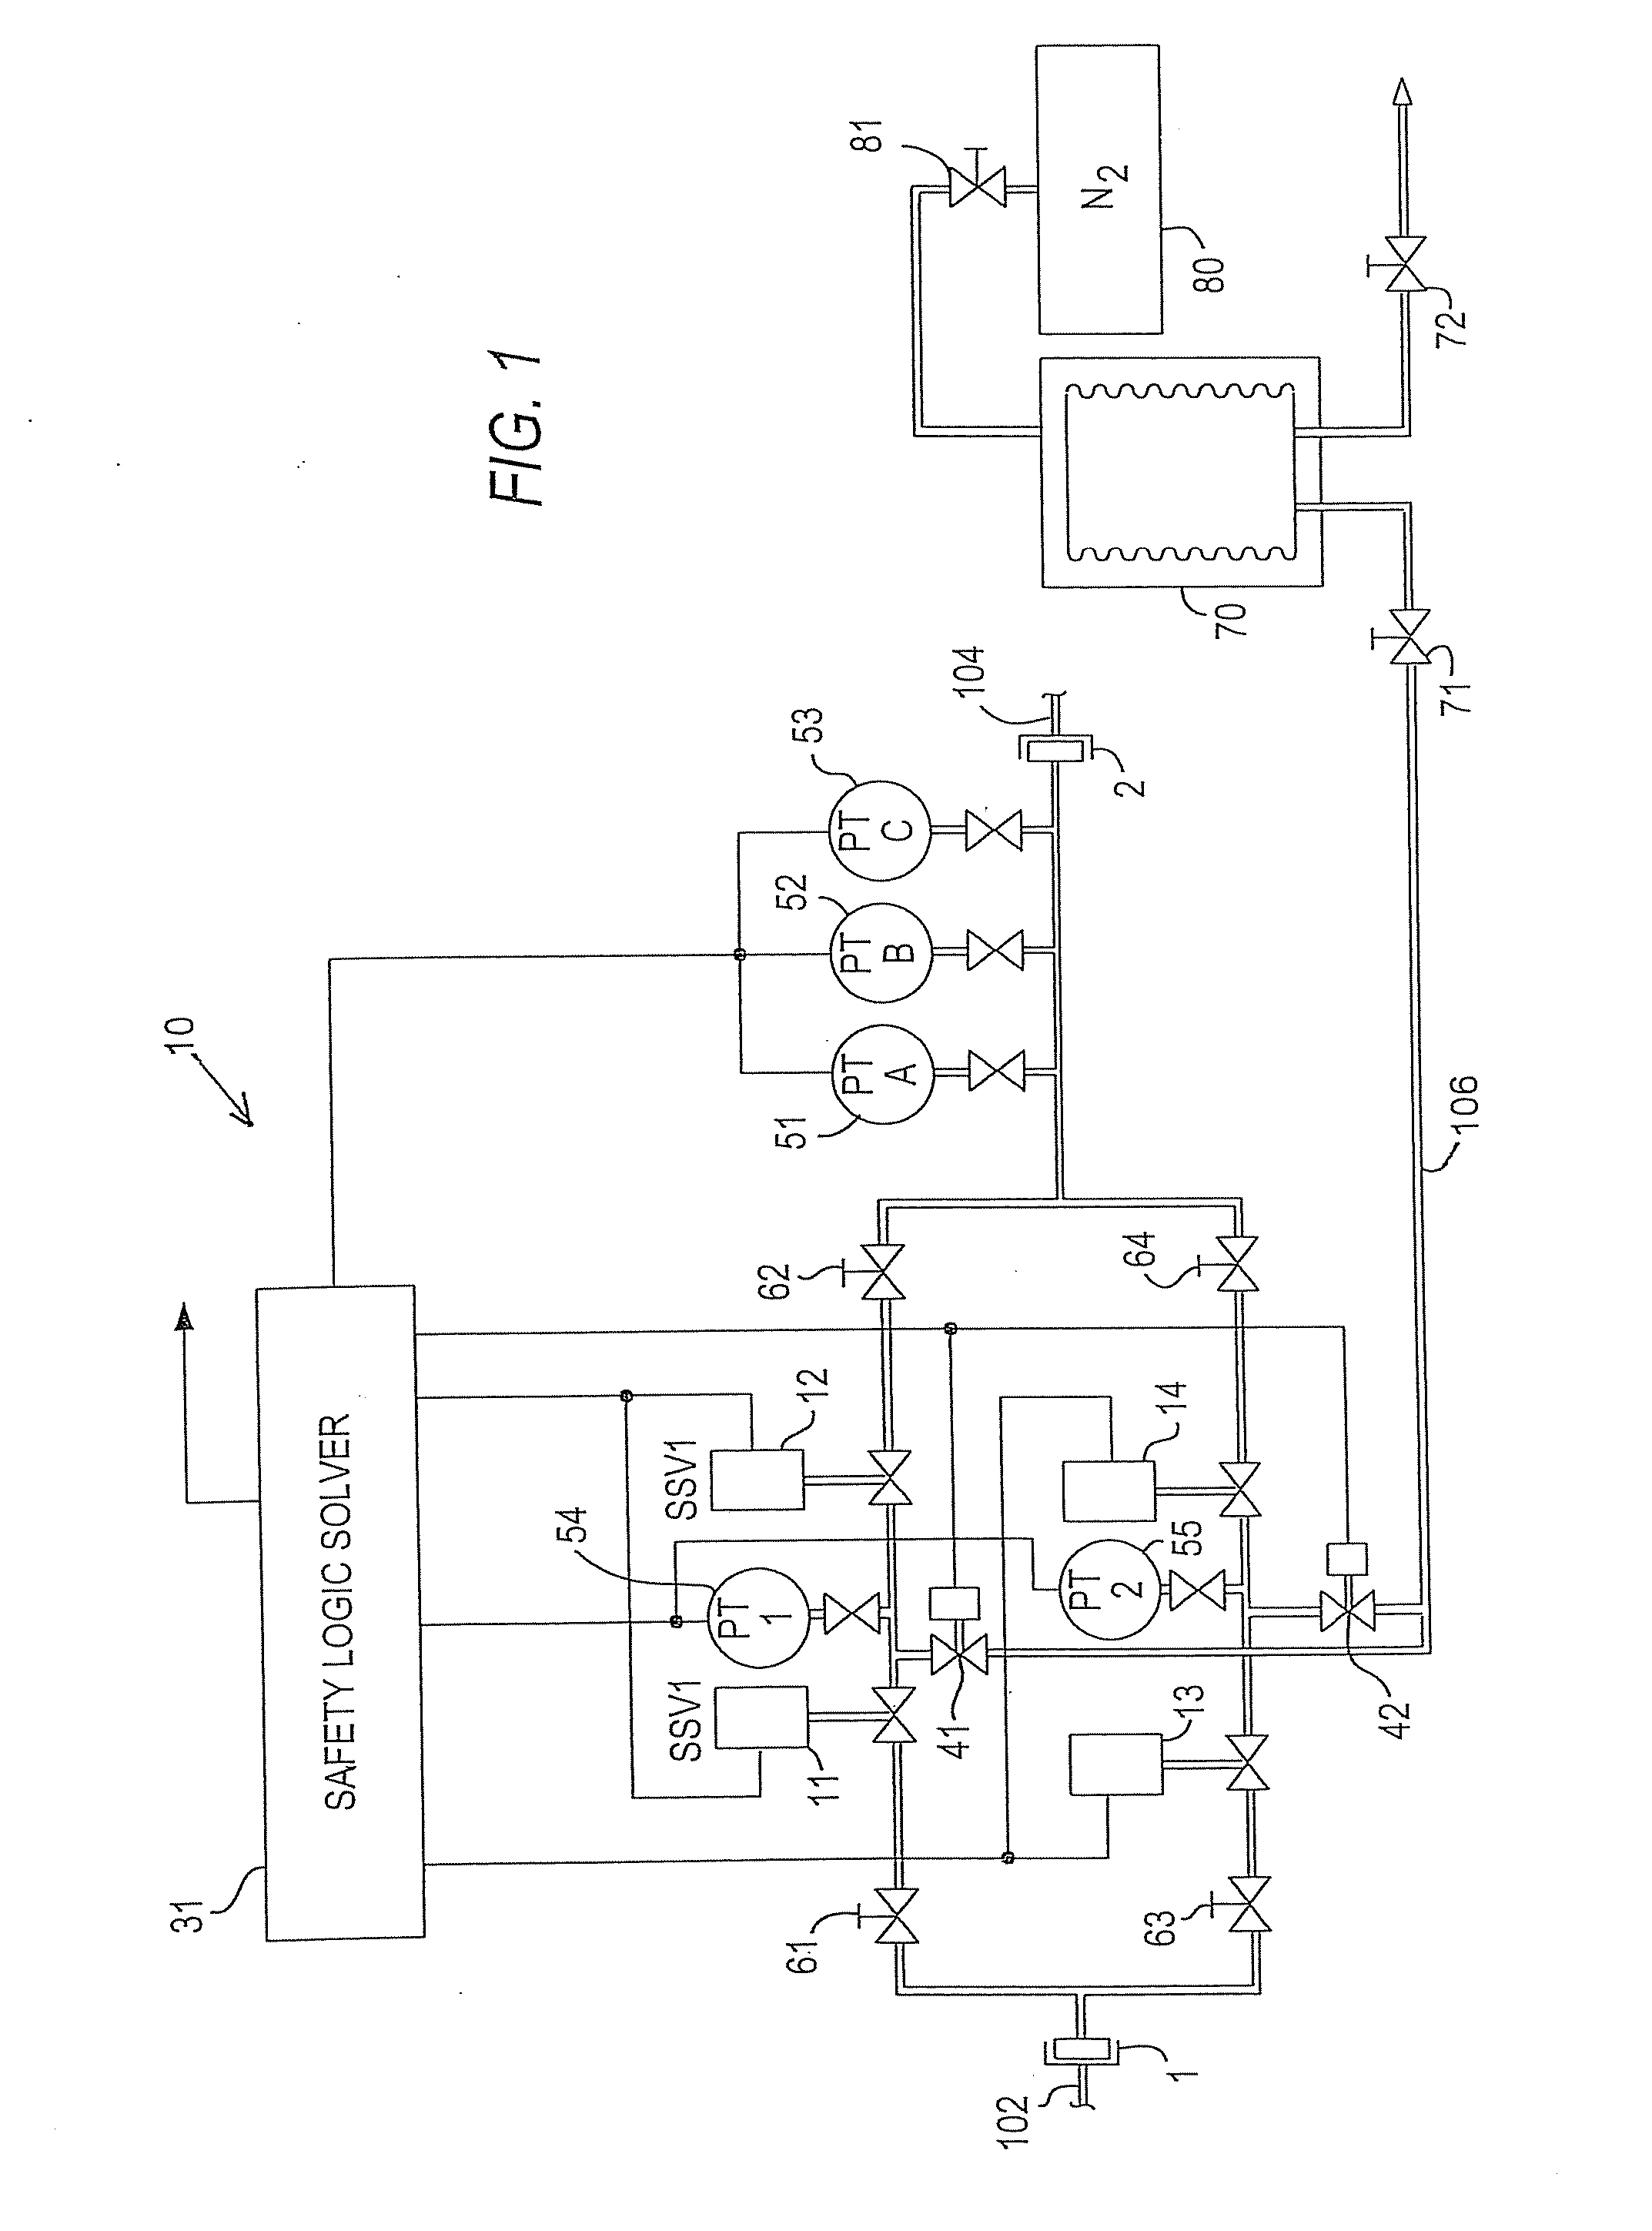 Apparatus for wellhead high integrity protection system